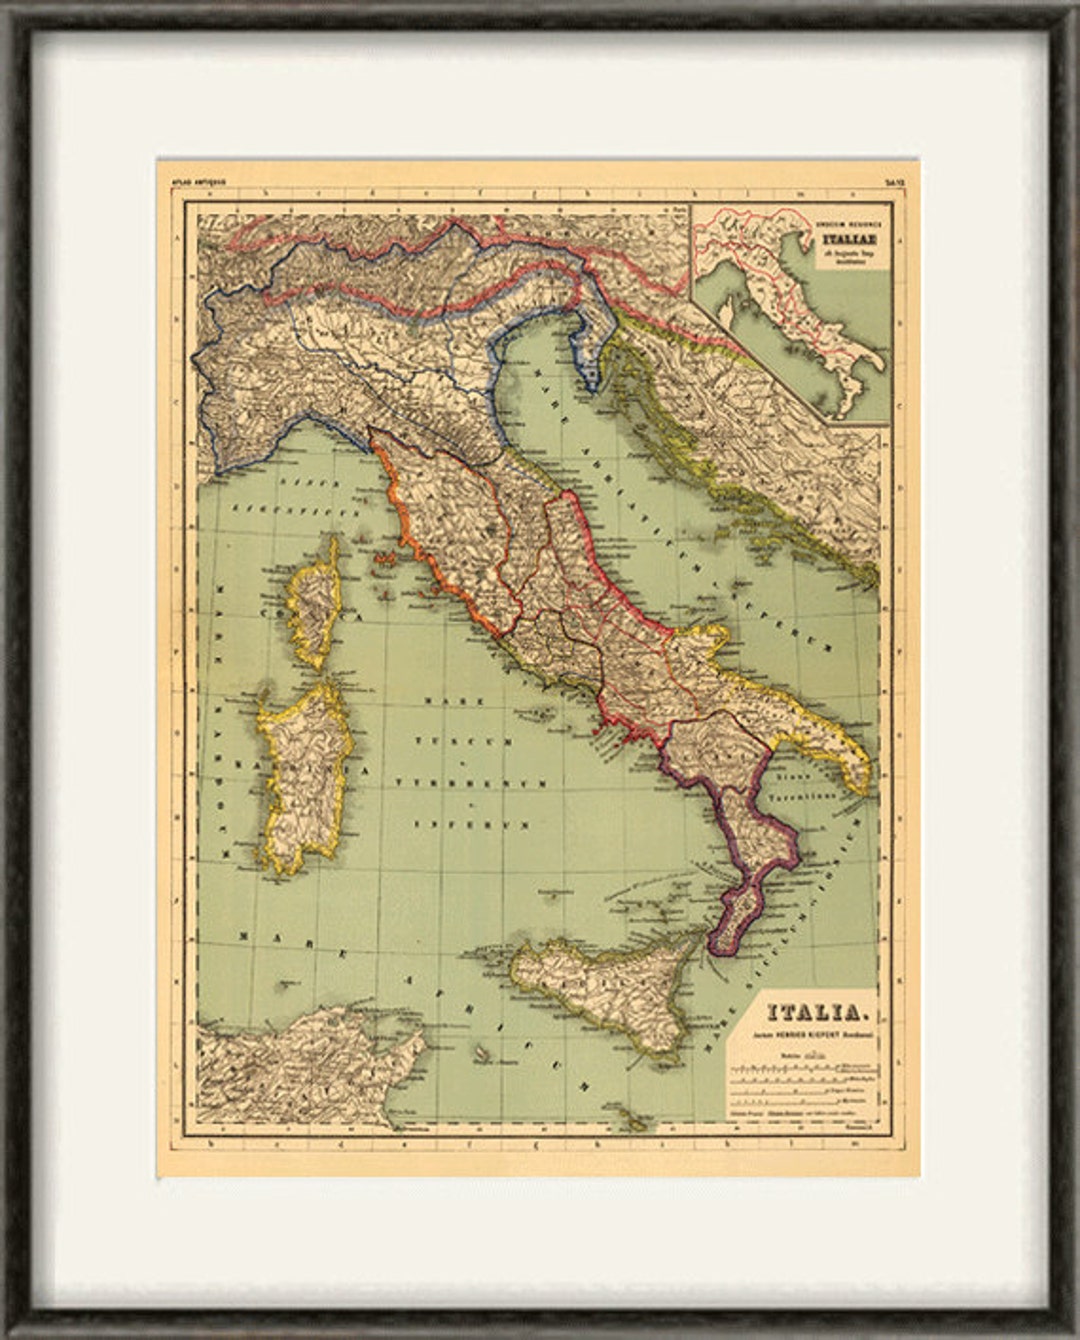 Antique Italy Map 1887 Ultra High Resolution 8 X 10 to 38 X 48 300 Dpi  Instant Digital Download -  Israel